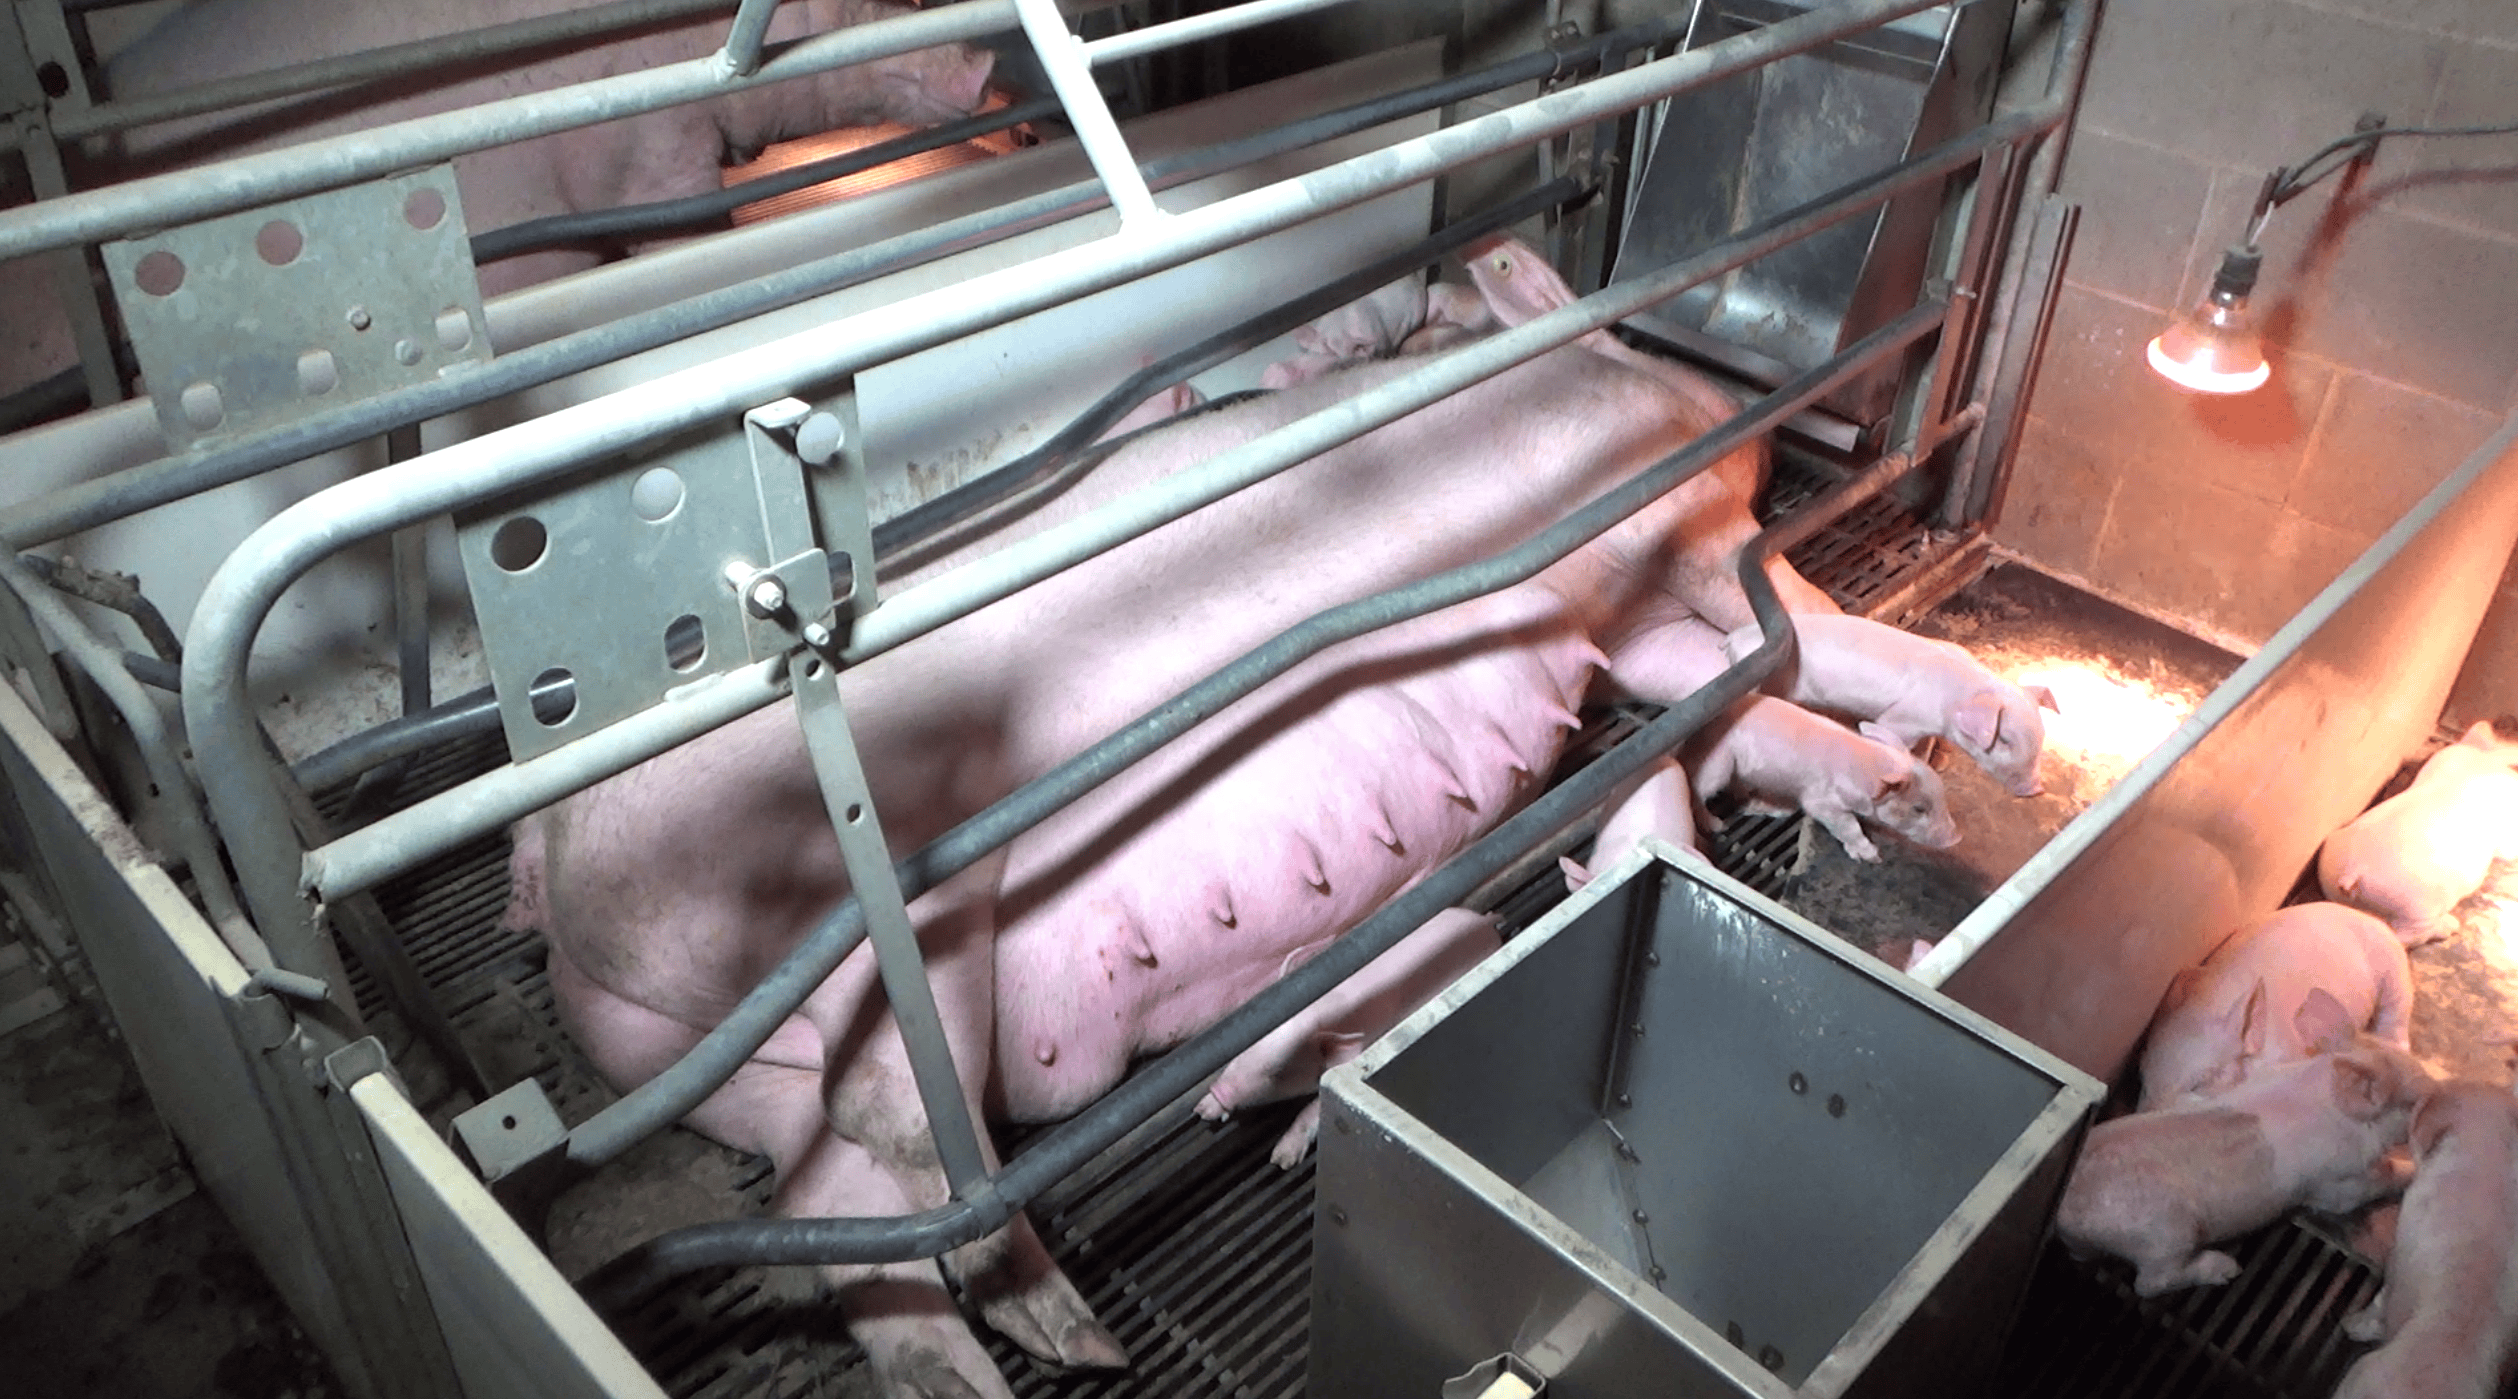 Pig in farrowing crate at Excelsior Hog Farm.